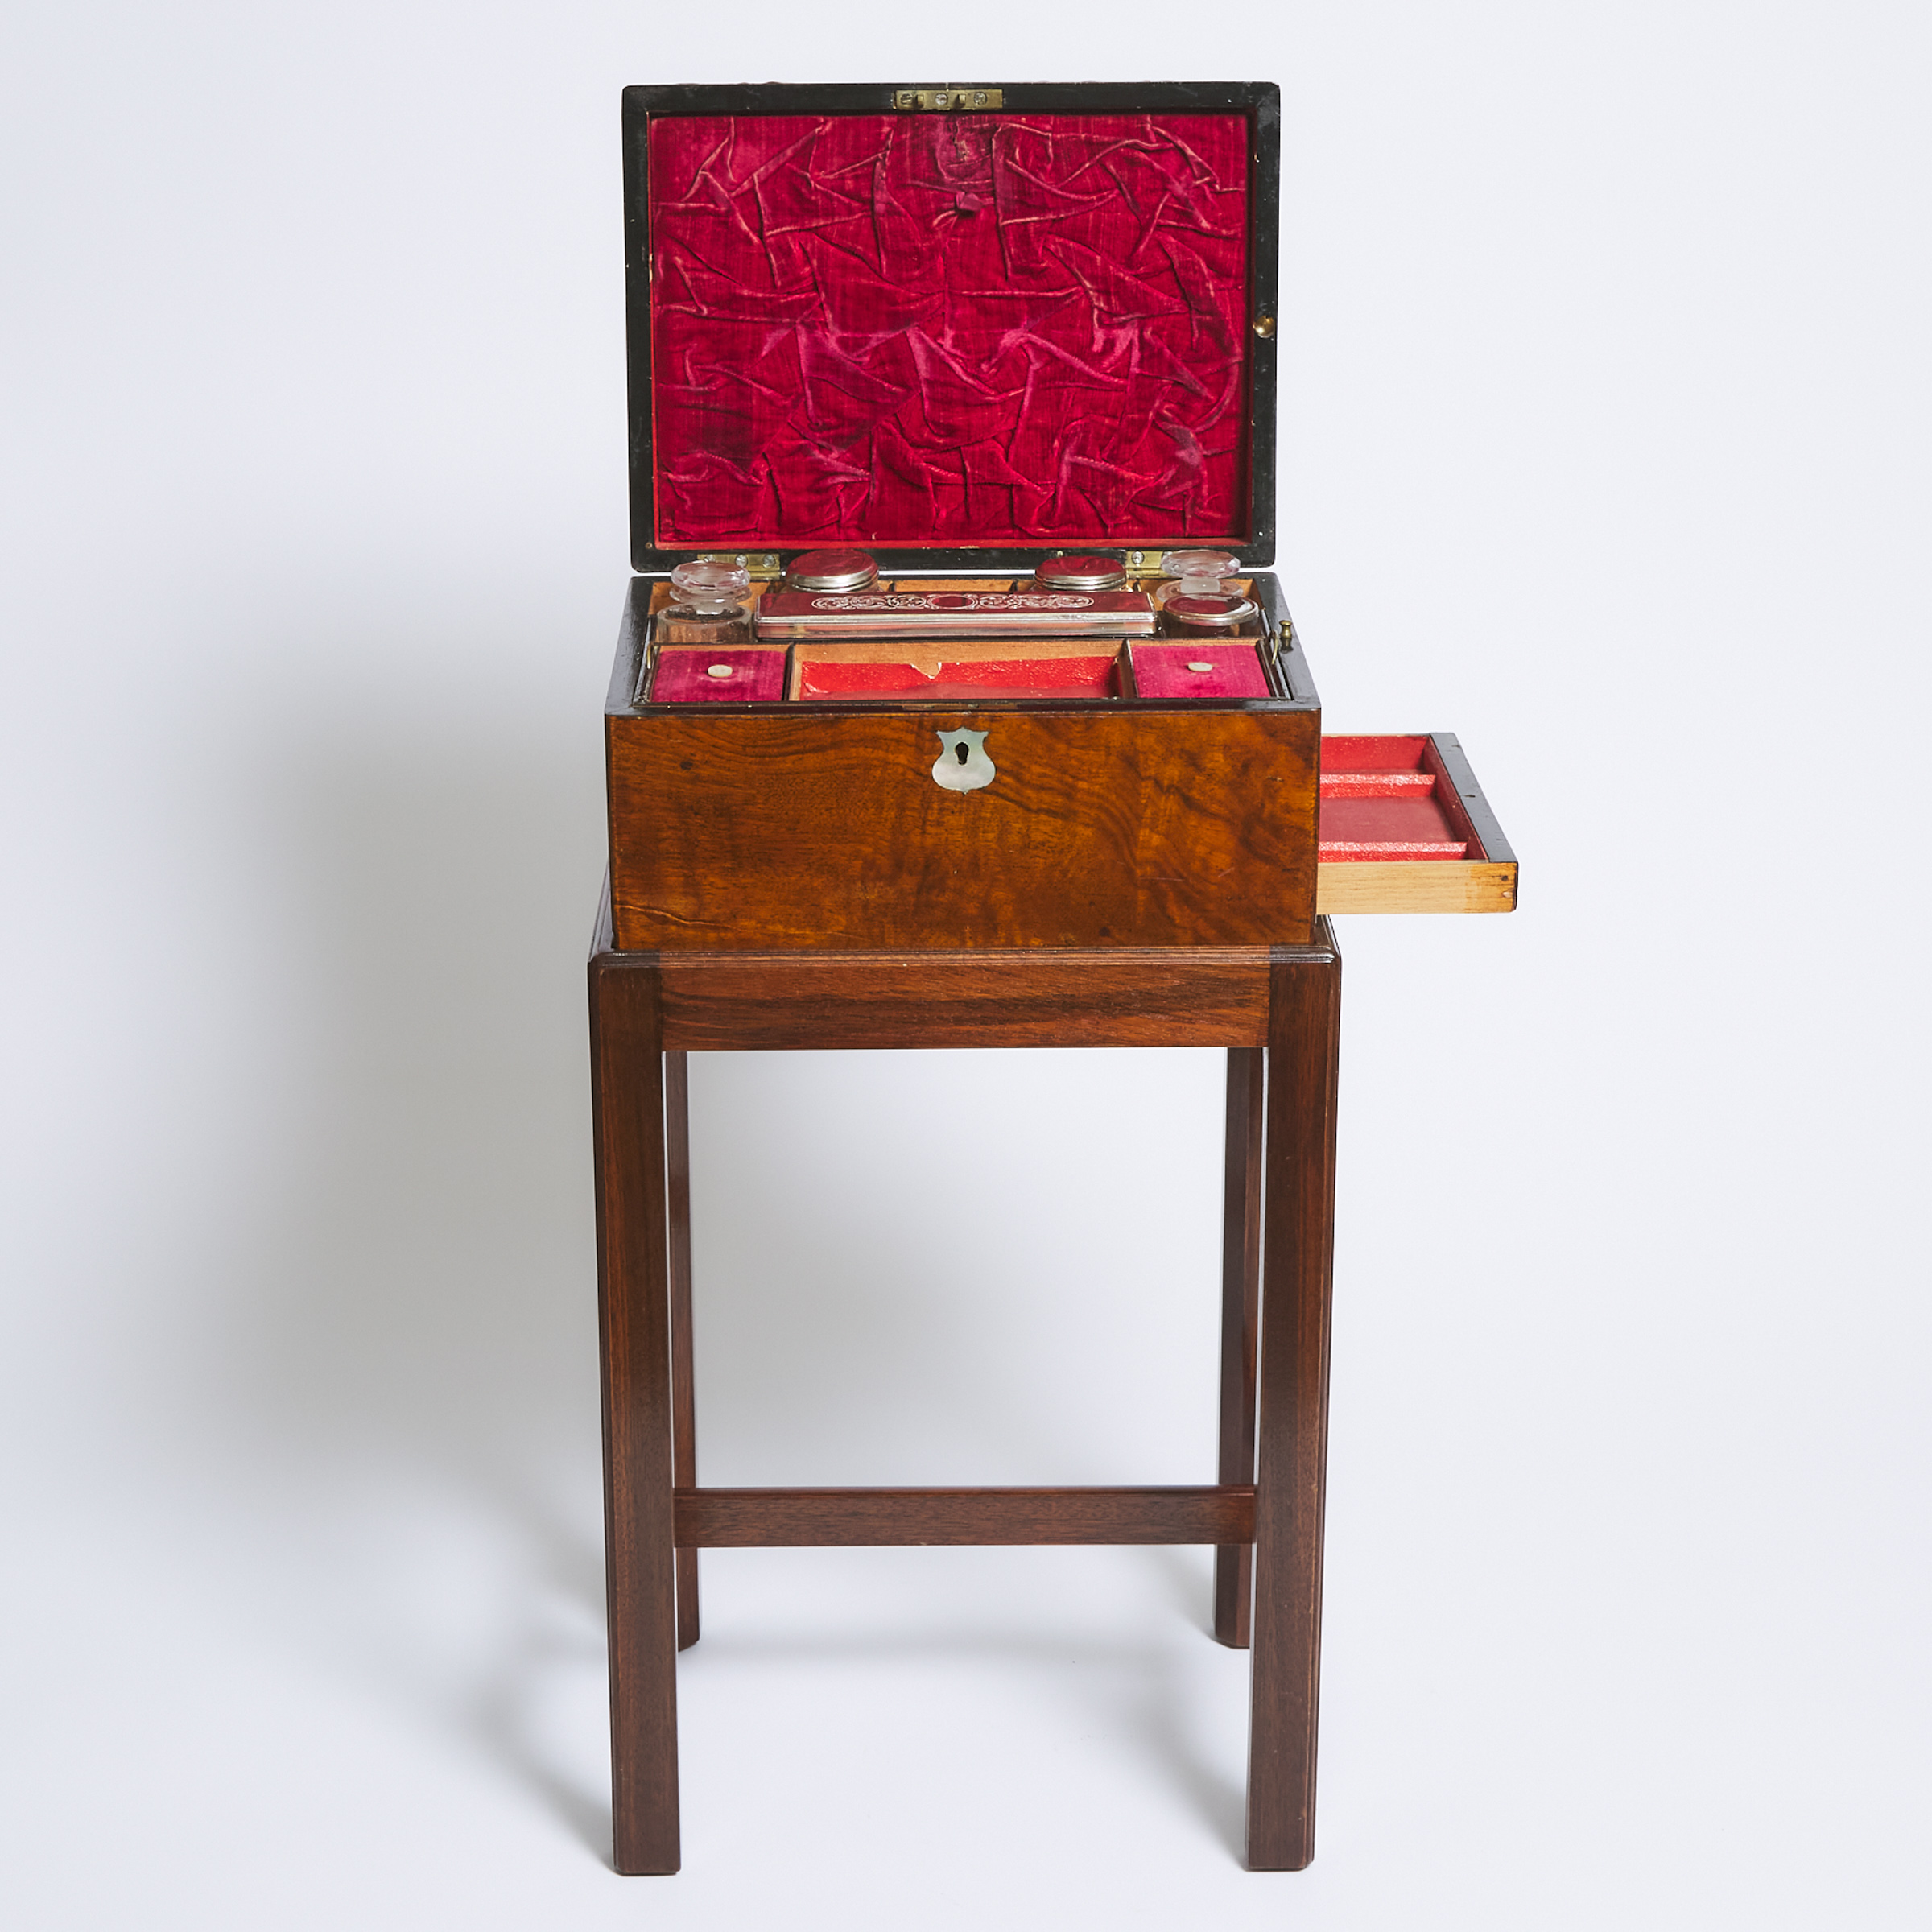 Victorian Burl Walnut Vanity Case Mounted on Stand as an Occasional Table, 19th century and later